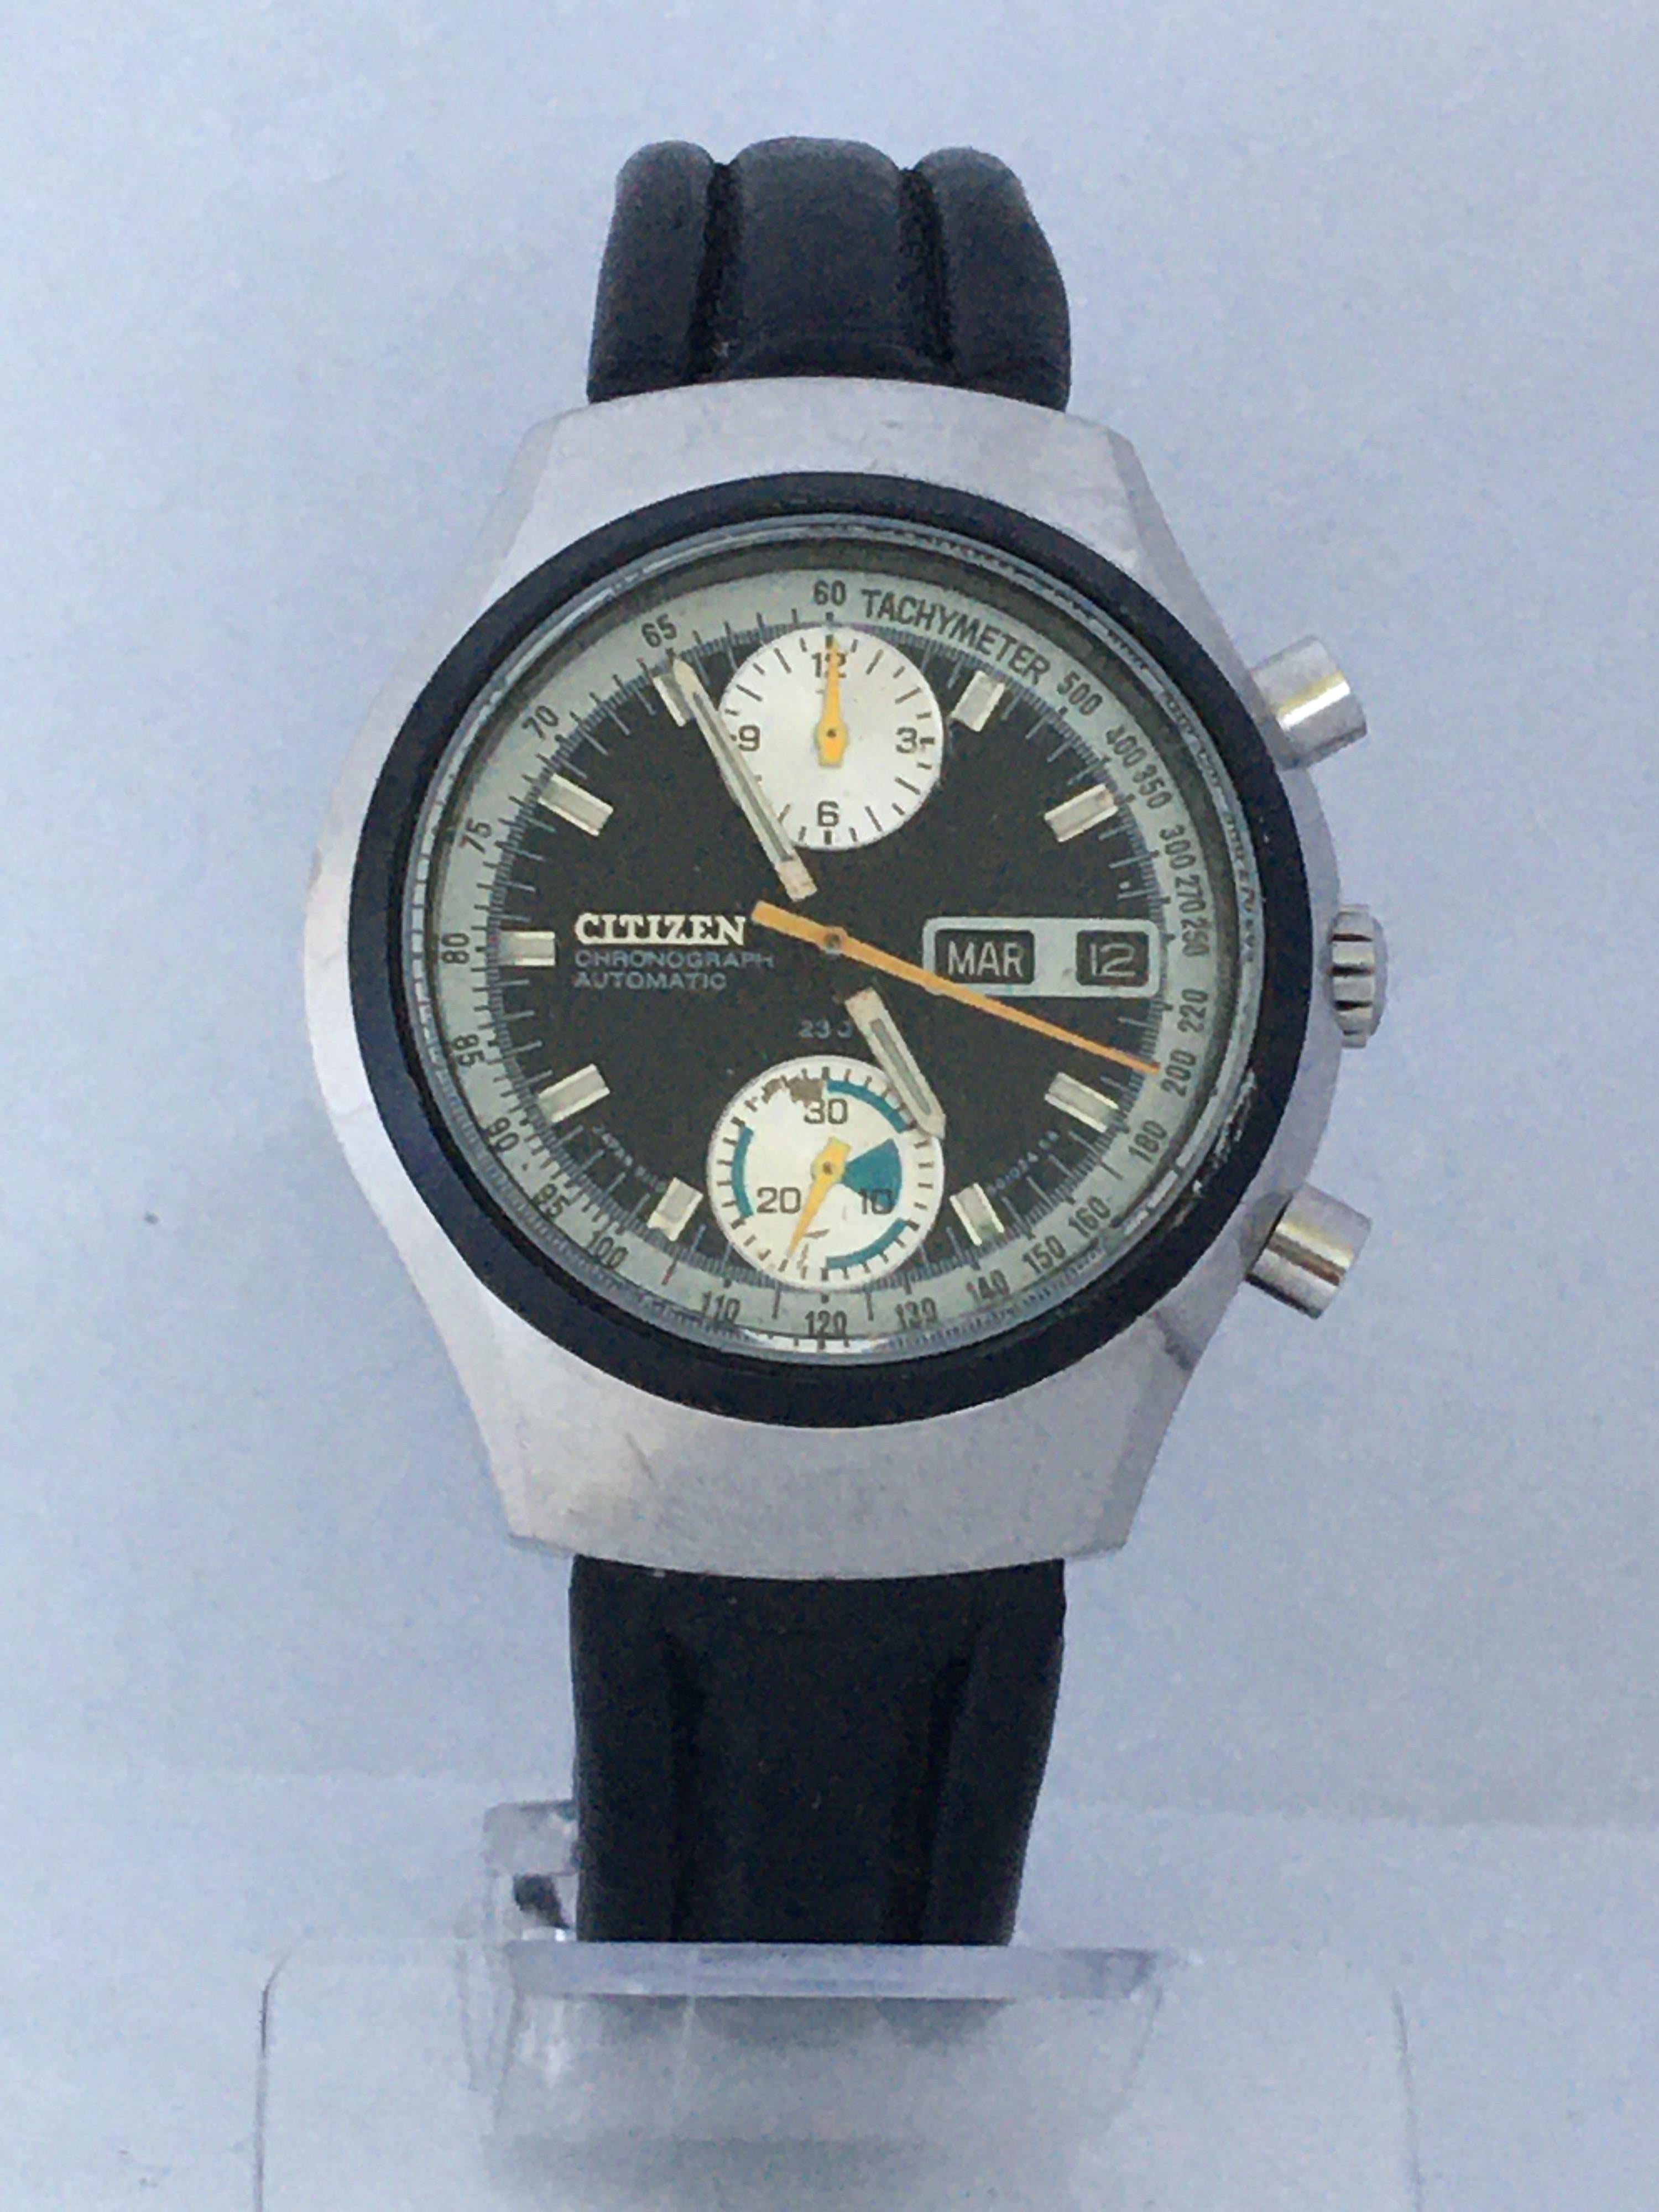 Vintage 1970s Stainless Steel Citizen Chronograph 8110 Automatic Watch For Sale 6